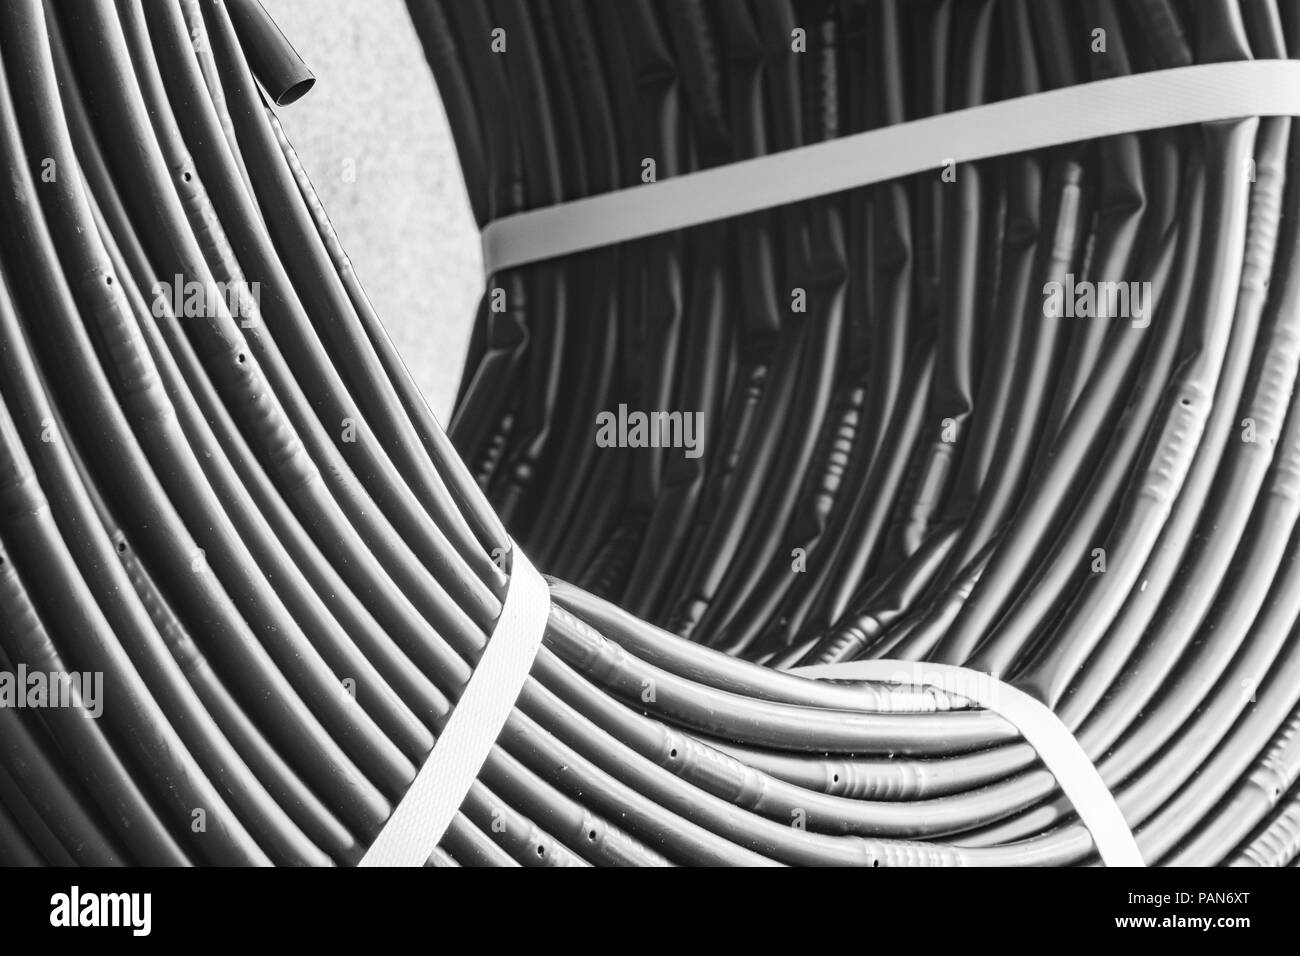 Close up on a roll of Drip Irrigation Hose used for efficient water saving system for agricultural crops. Stock Photo